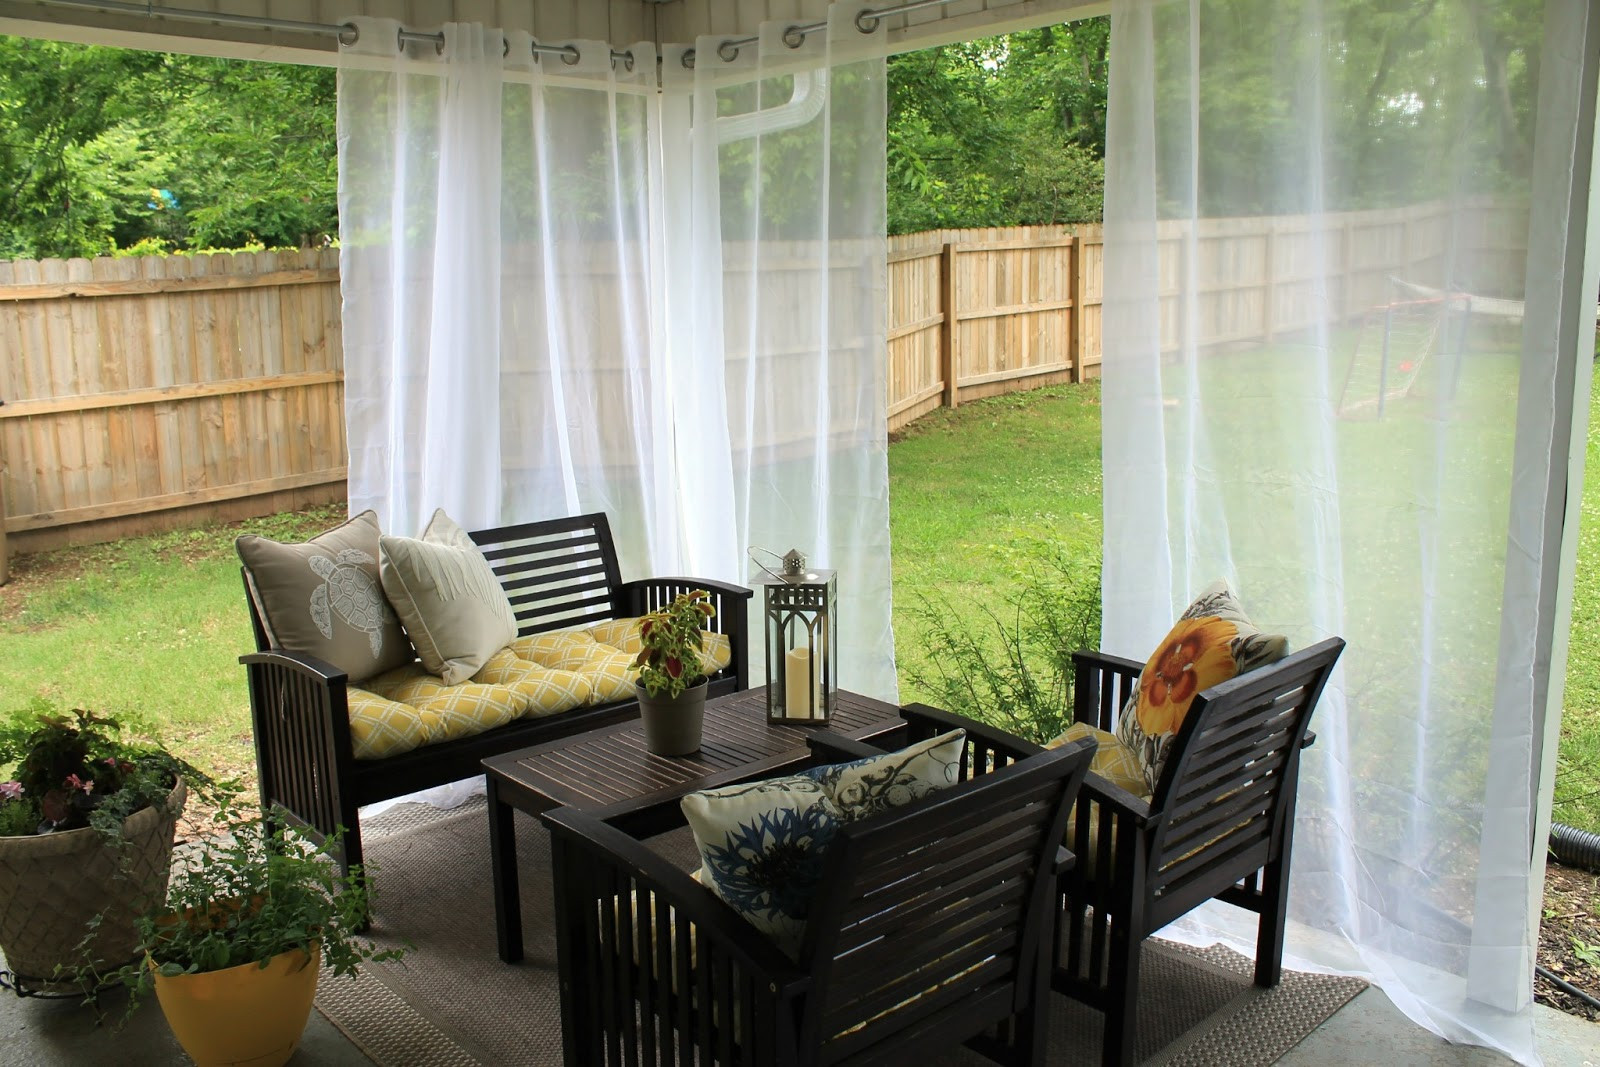 Best ideas about DIY Outdoor Curtain Rods
. Save or Pin DIY Curtain Rod Now.